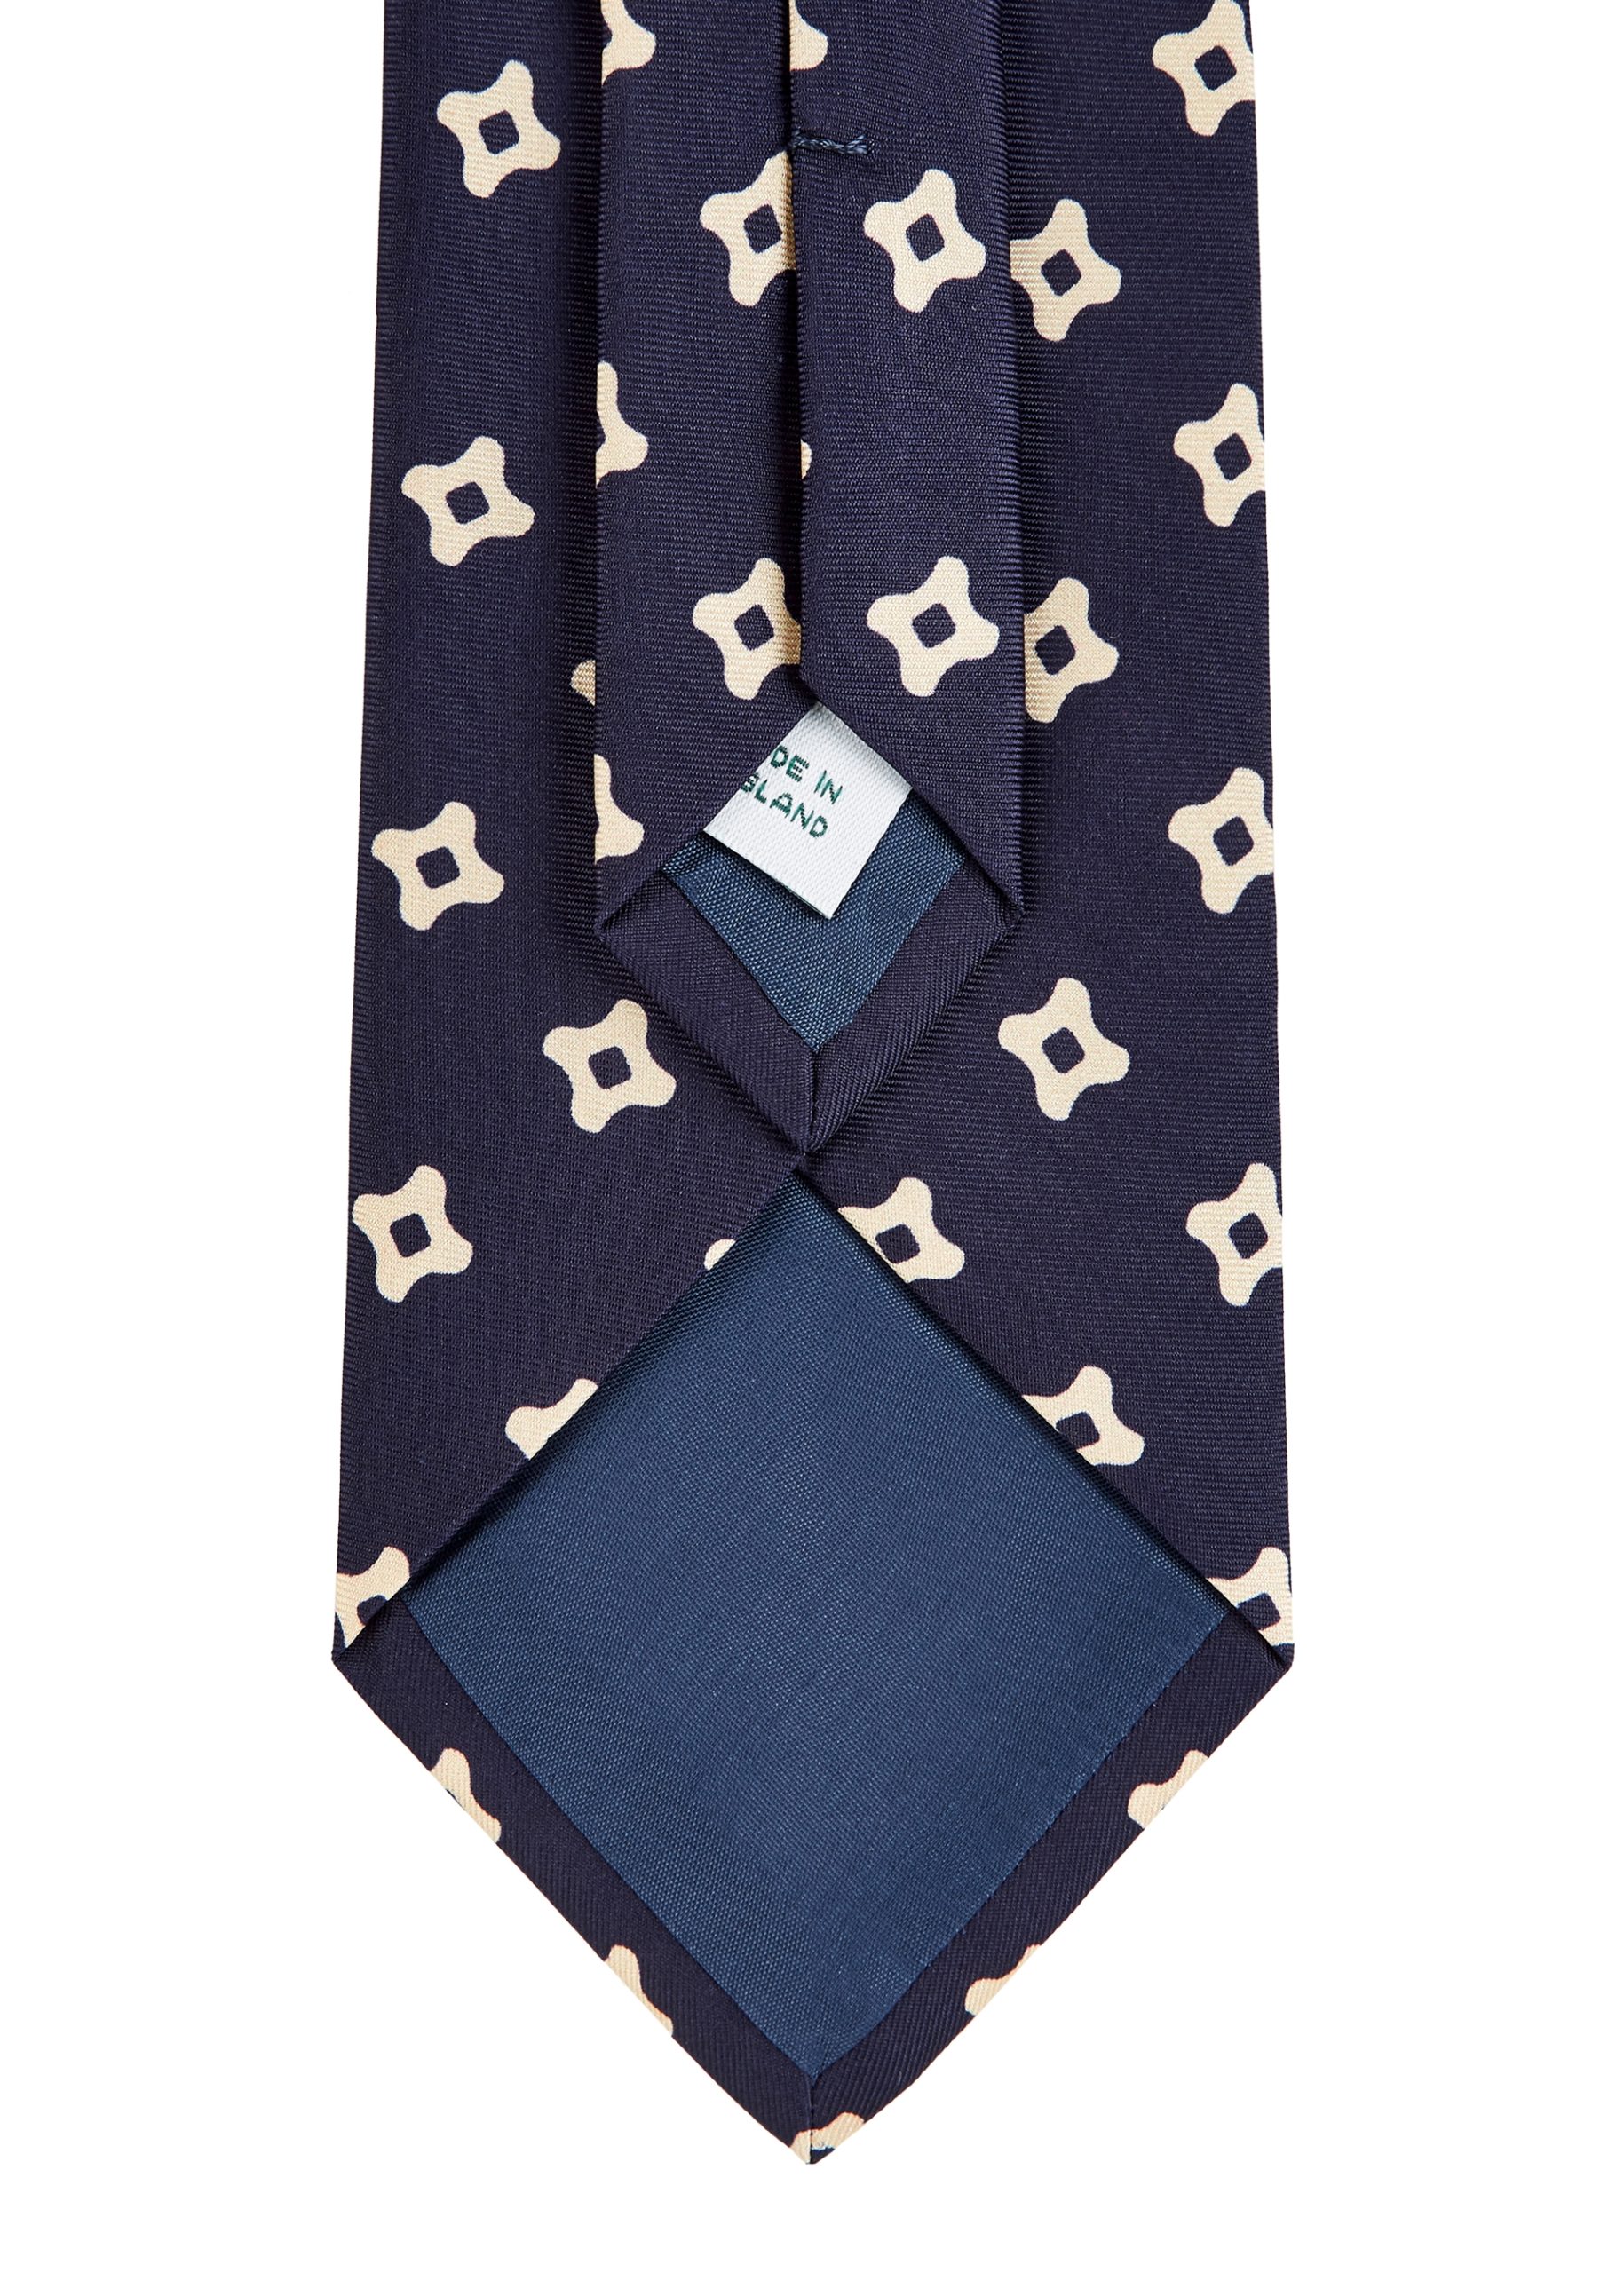 Roderick Charles navy silk tie with square patterned